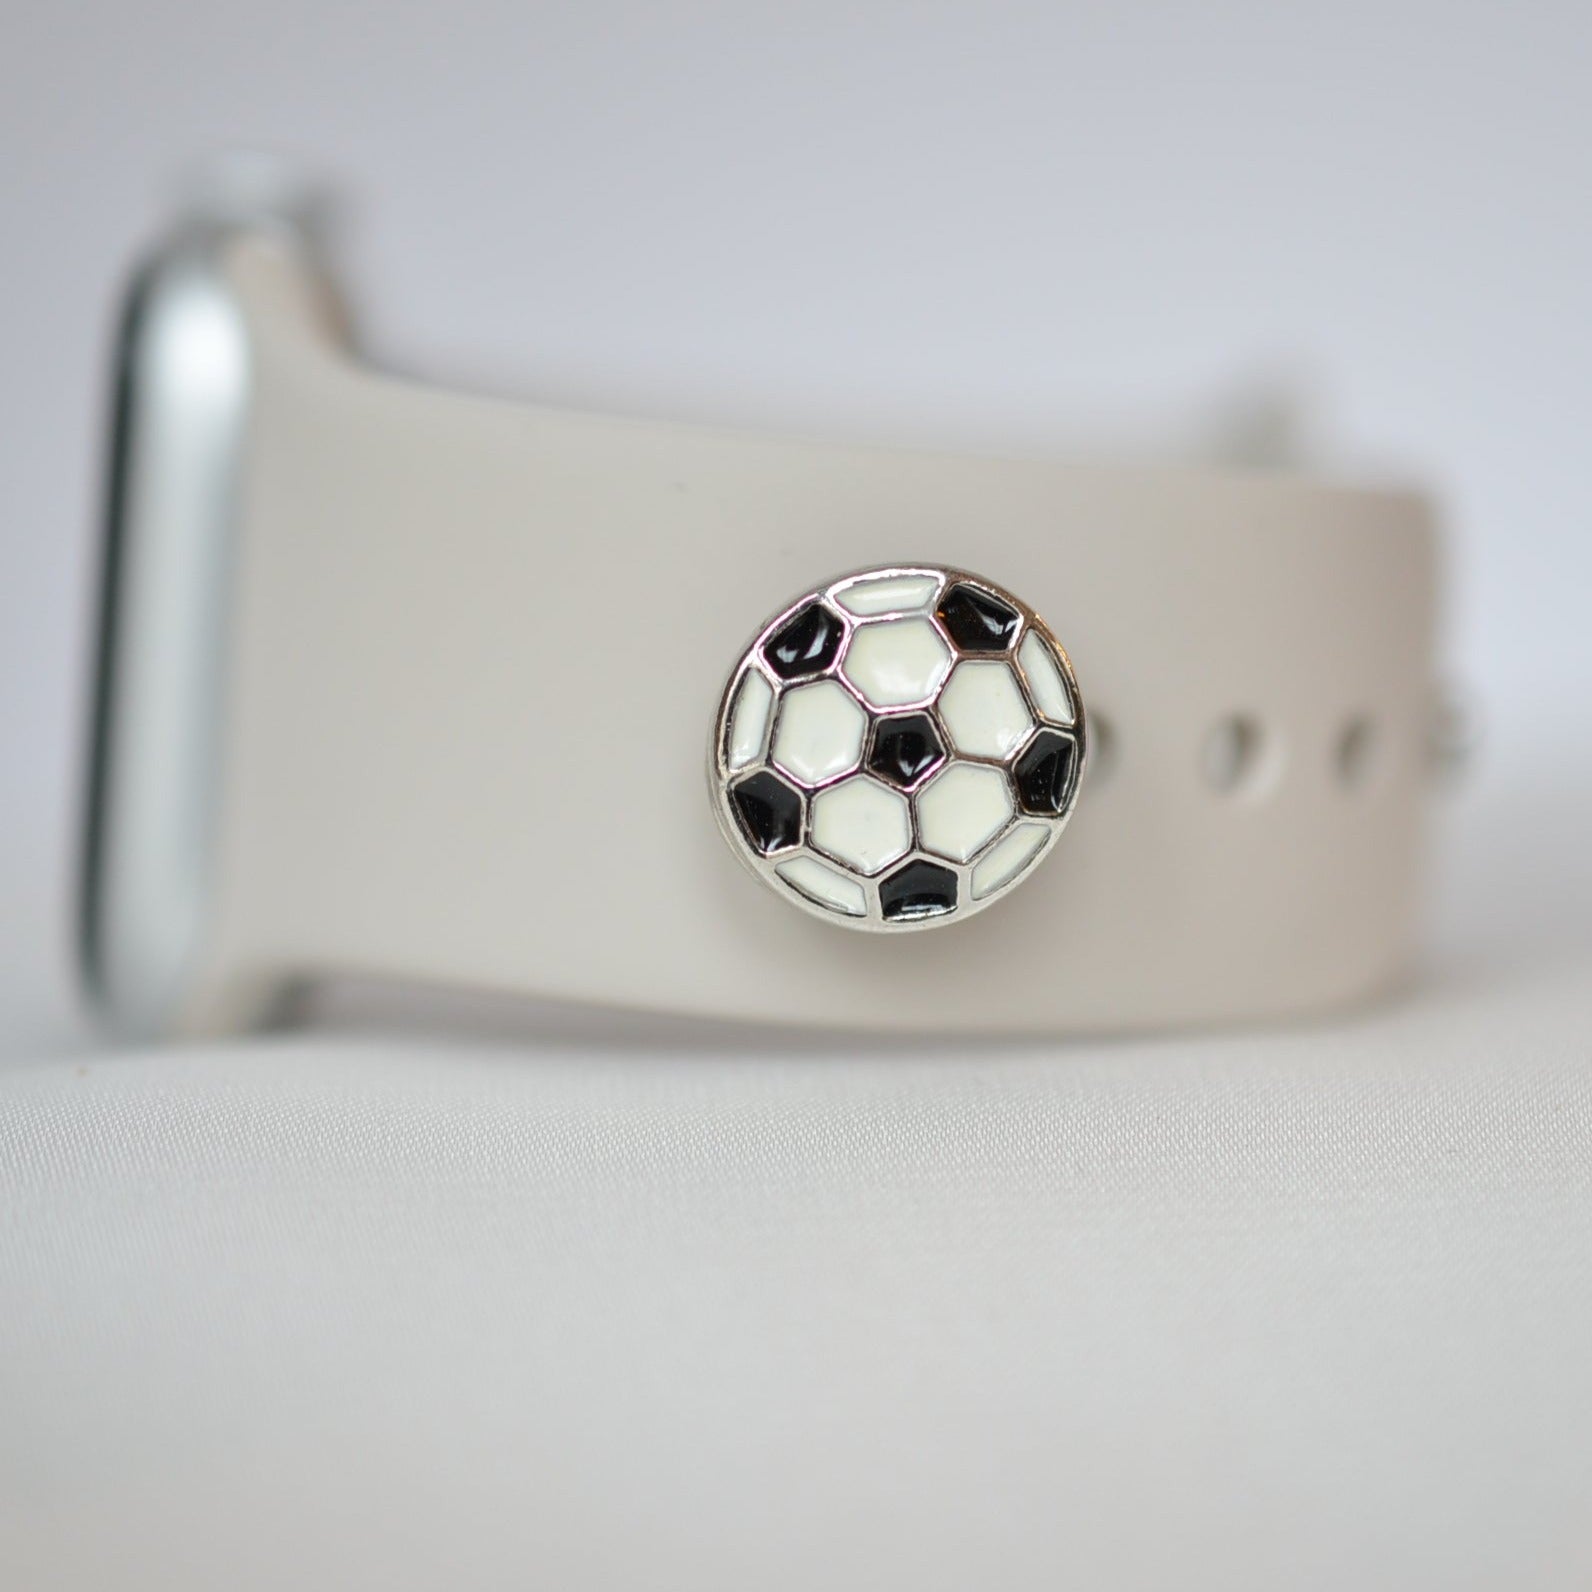 Soccer Ball Charm for Watch Bands, Belts and Bags